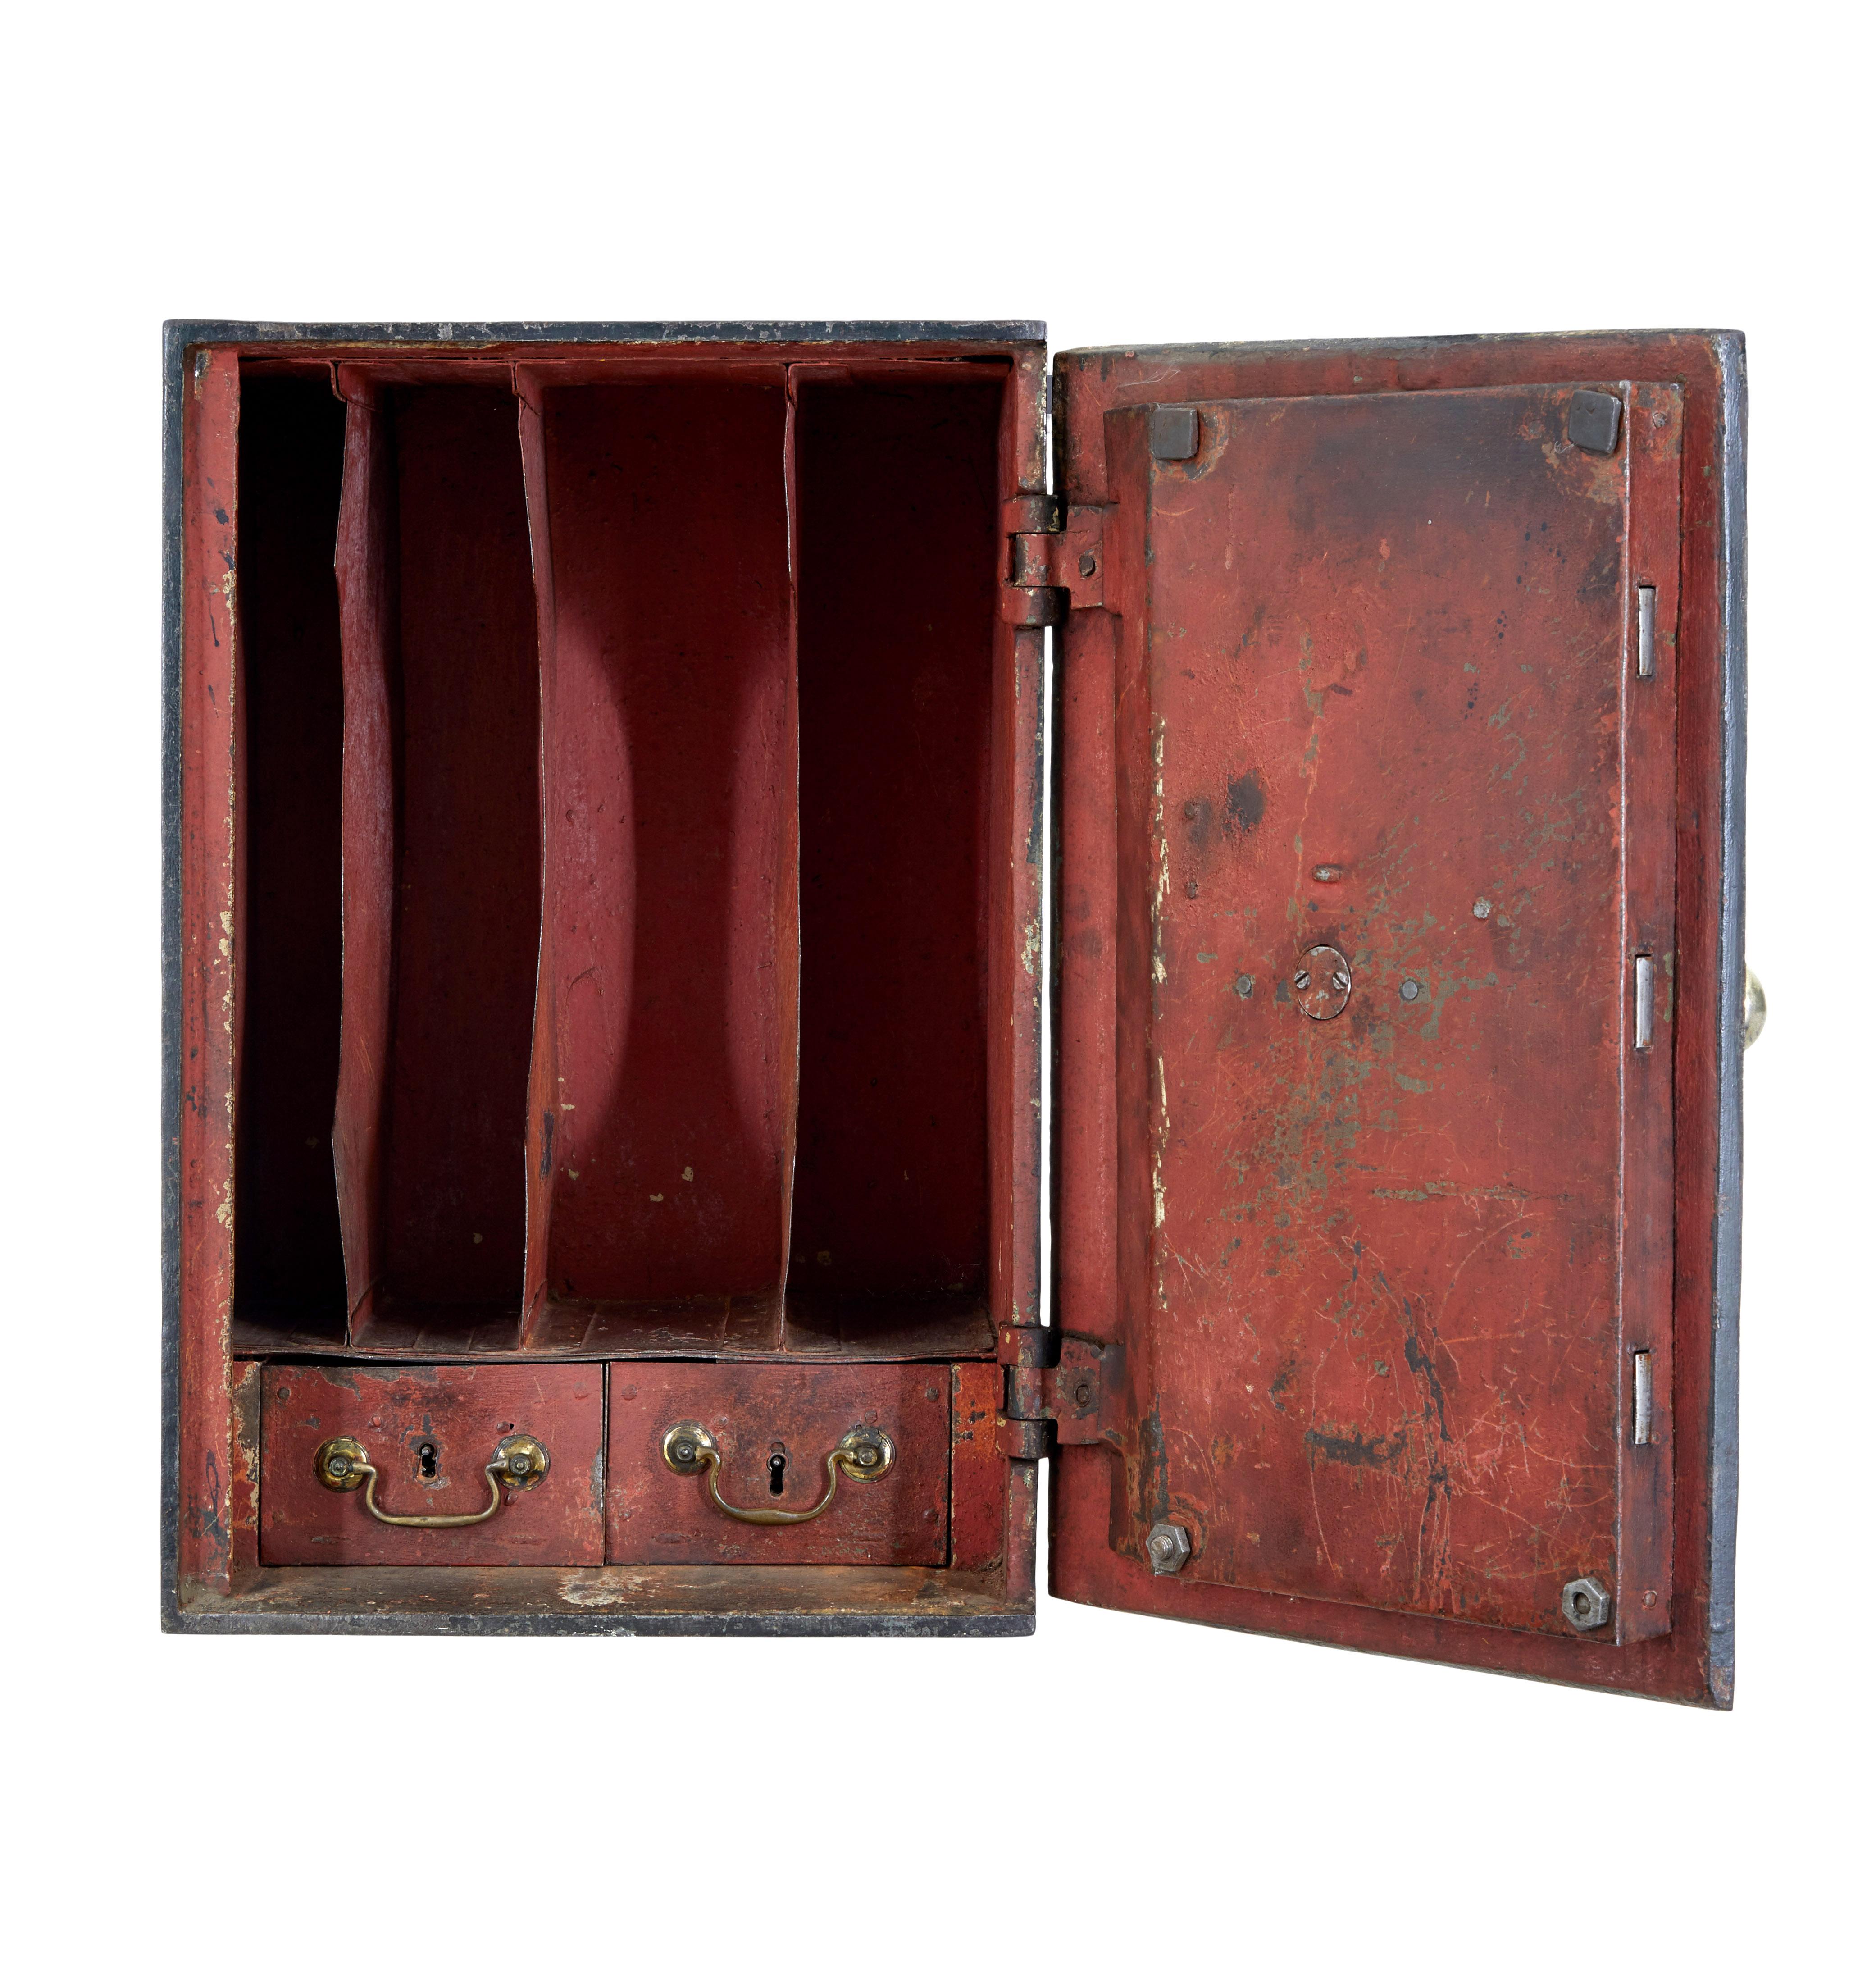 Early 19th century cast iron safe in original paint circa 1800.

We are pleased to offer this local find.  Often we have safe's that have been re-conditioned, but this safe comes in it's original colour and patina, it may even be earlier than the